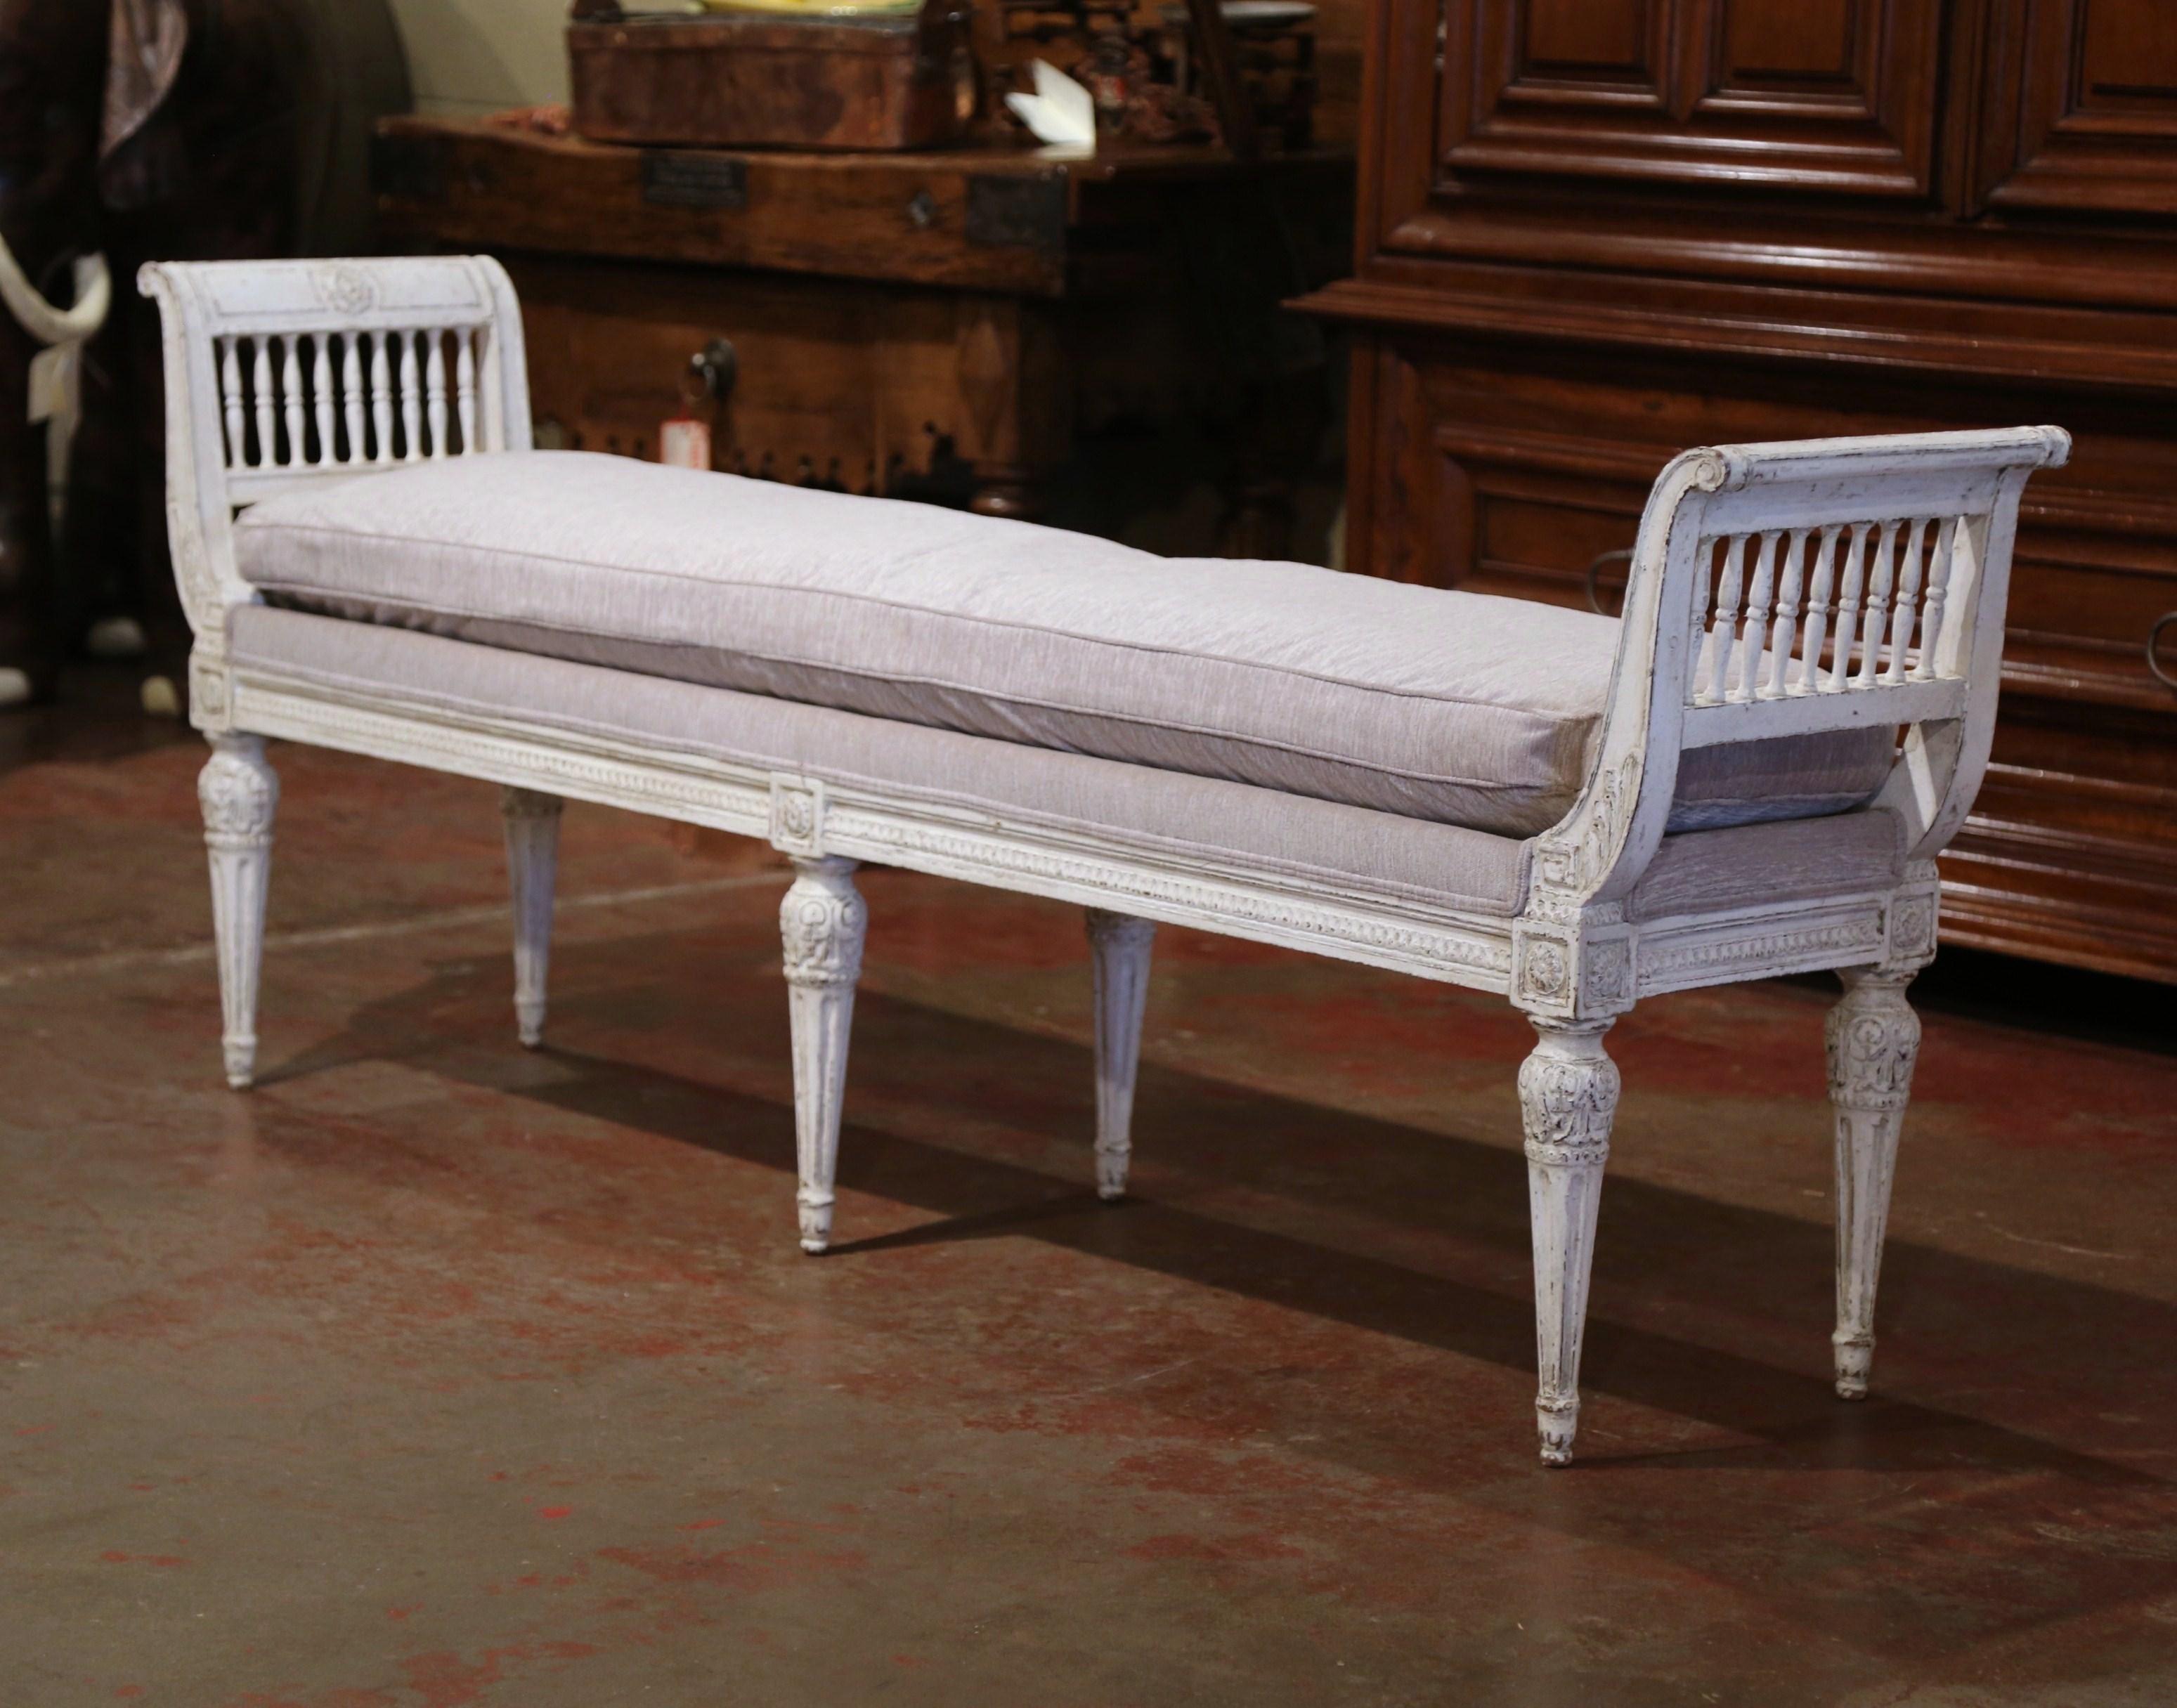 Place this elegant antique six-leg bench at the foot of a king size bed or in your living room for extra, versatile seating. Crafted in France, circa 1890, the traditional banquette stands on six tapered and fluted legs embellished with carved